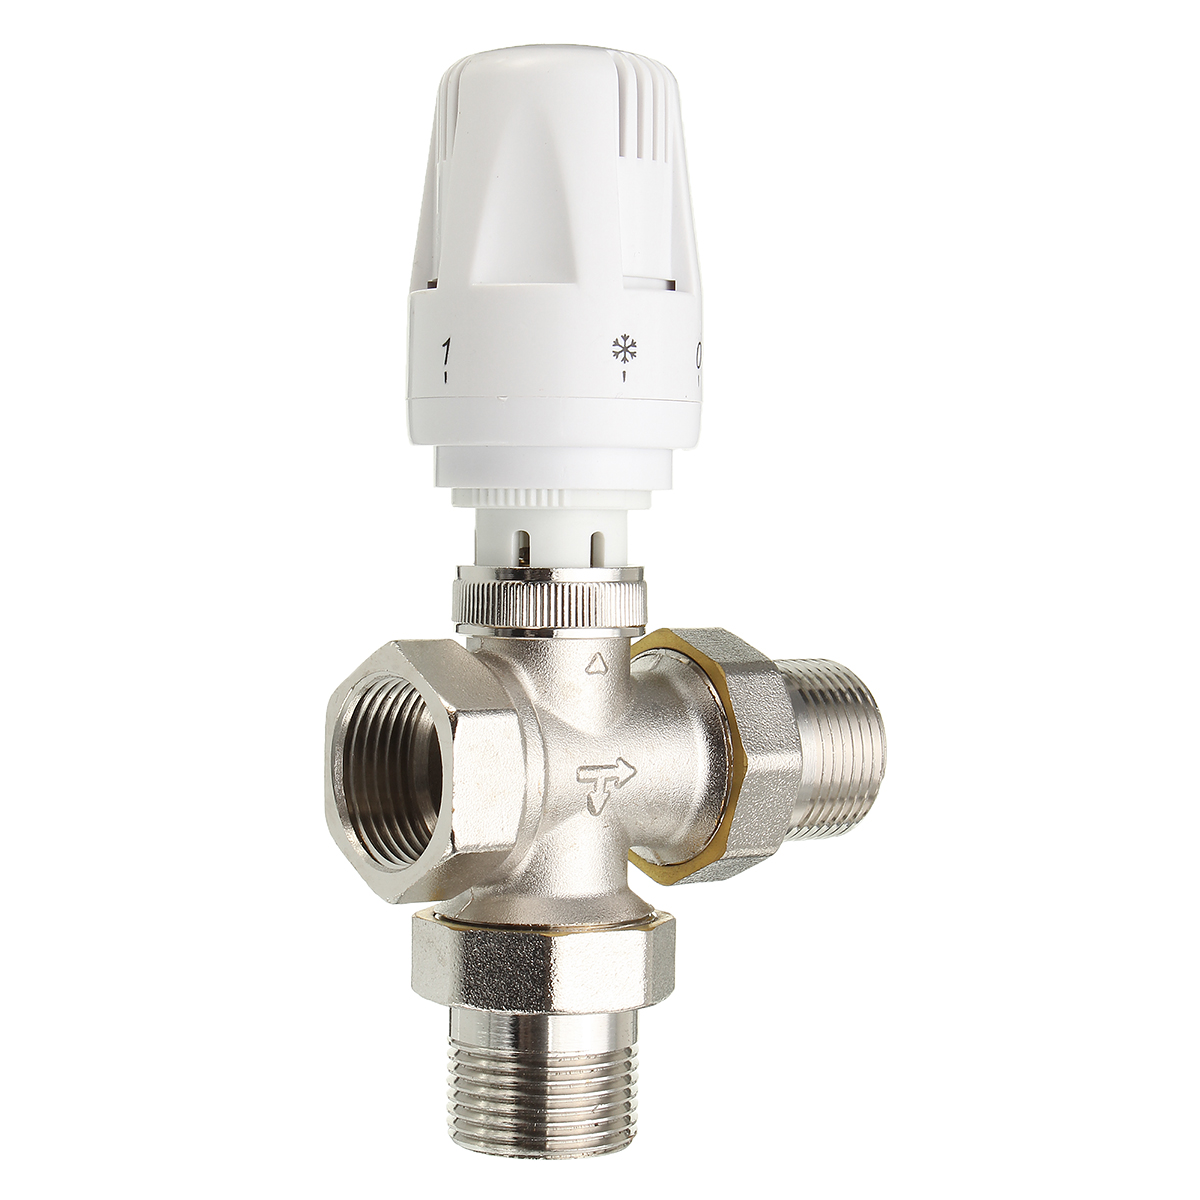 G12G34G1-Standard-Thermostatic-Angled-Radiator-Brass-Valve-For-Five-Temperature-Settings-1290501